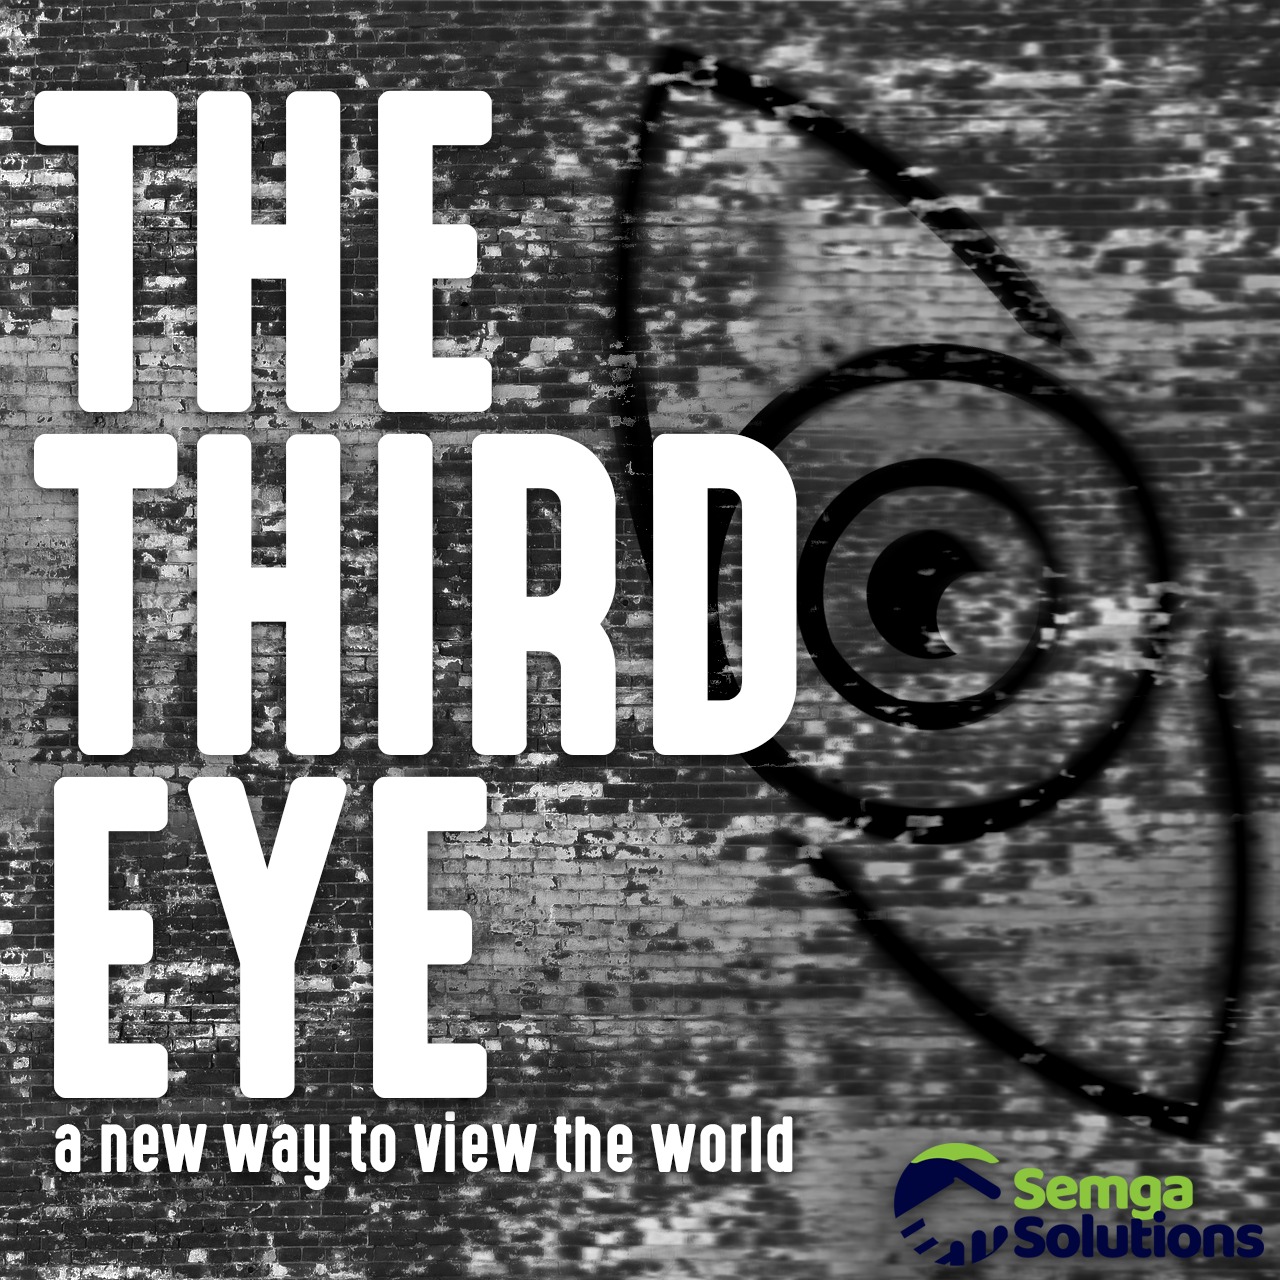 New episode of the third eye coming up soon